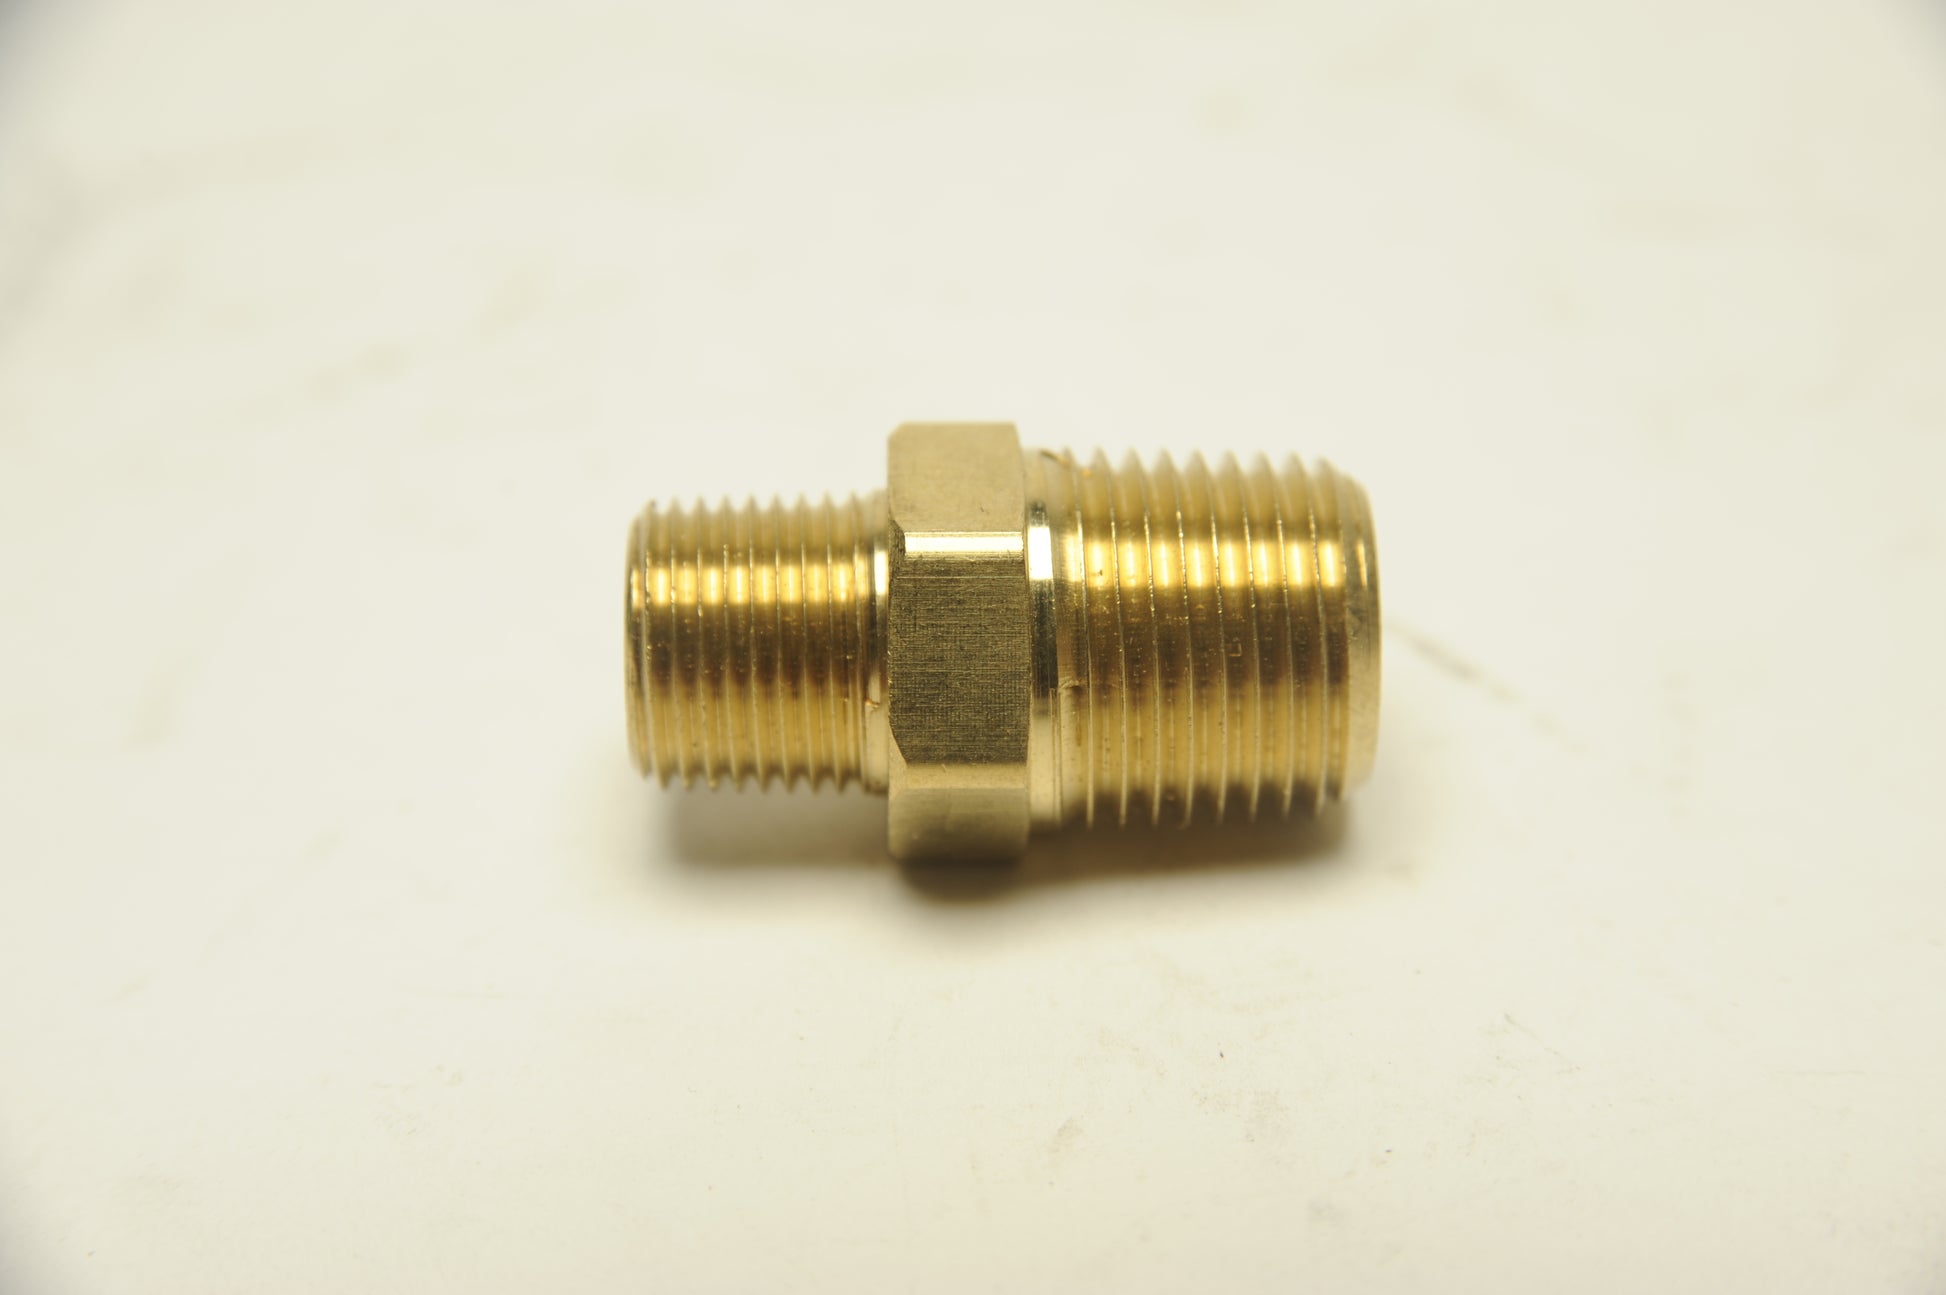 Brass Fitting - HMPTMP 1/2" Male to 3/8" Male Pipe Thread | Barbecues Galore Get it online or in store in Burlington, Oakville, Etobicoke, and Calgary